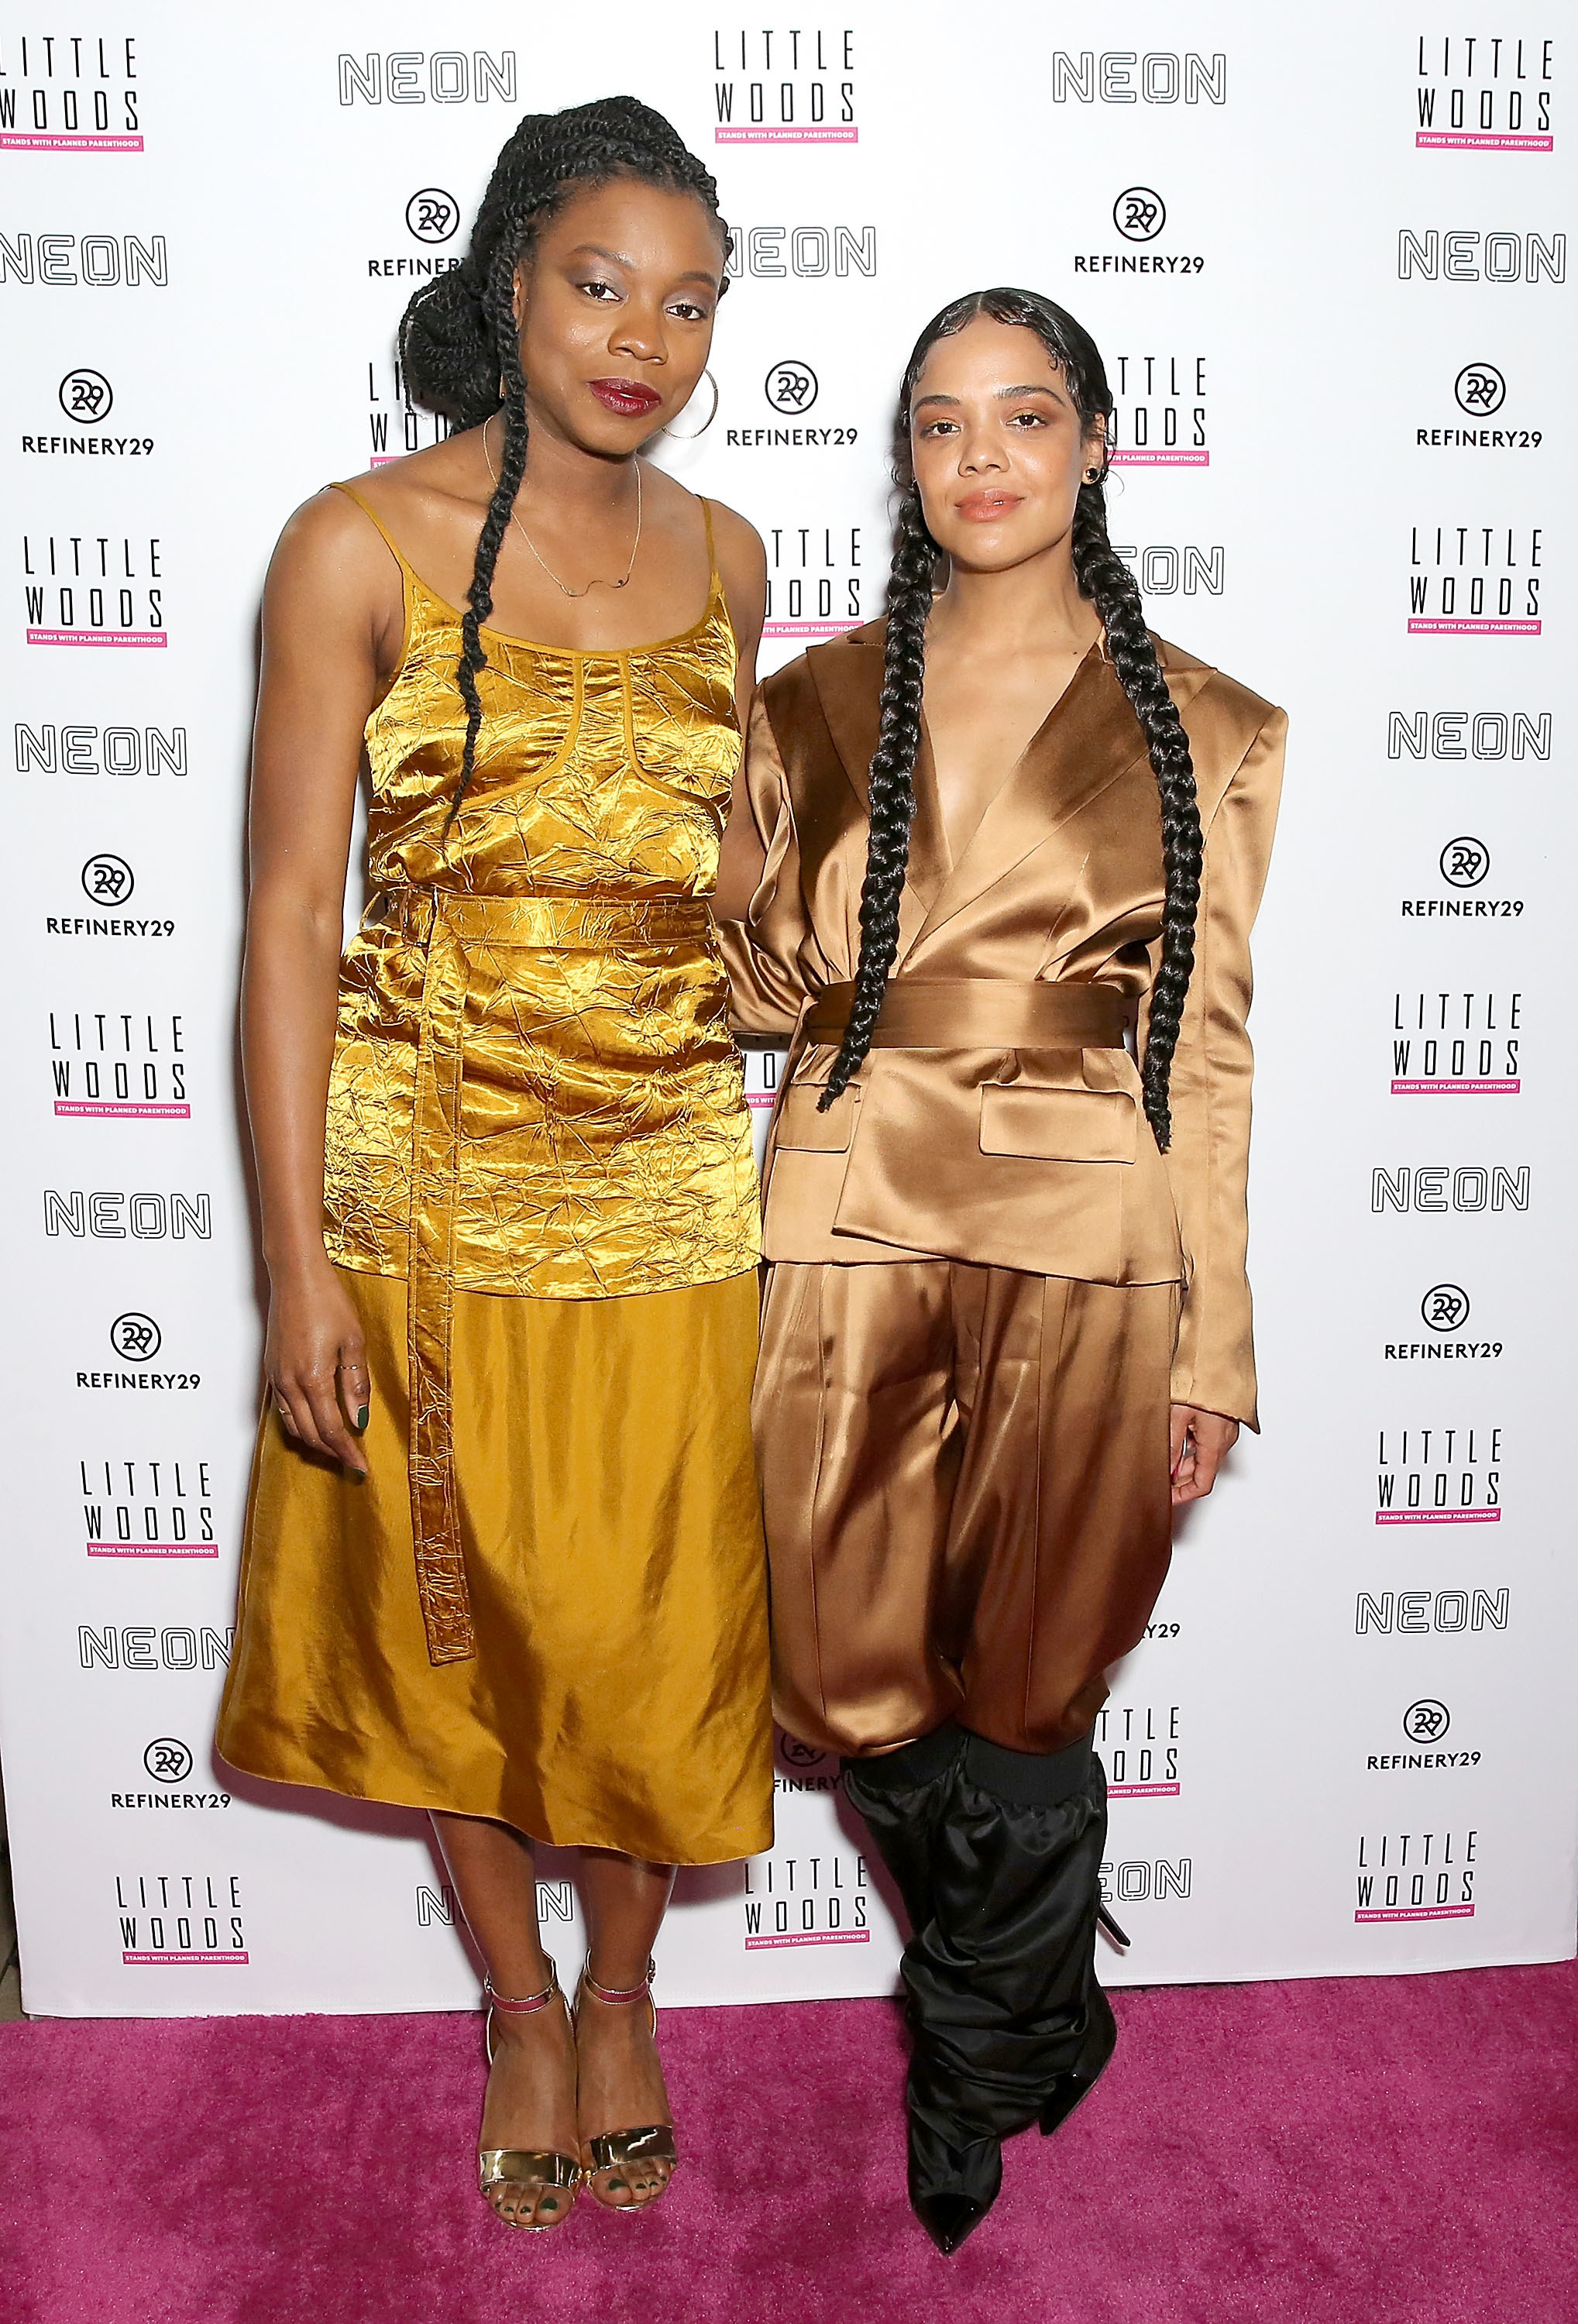 Nia and Tessa Thompson posing on the red carpet